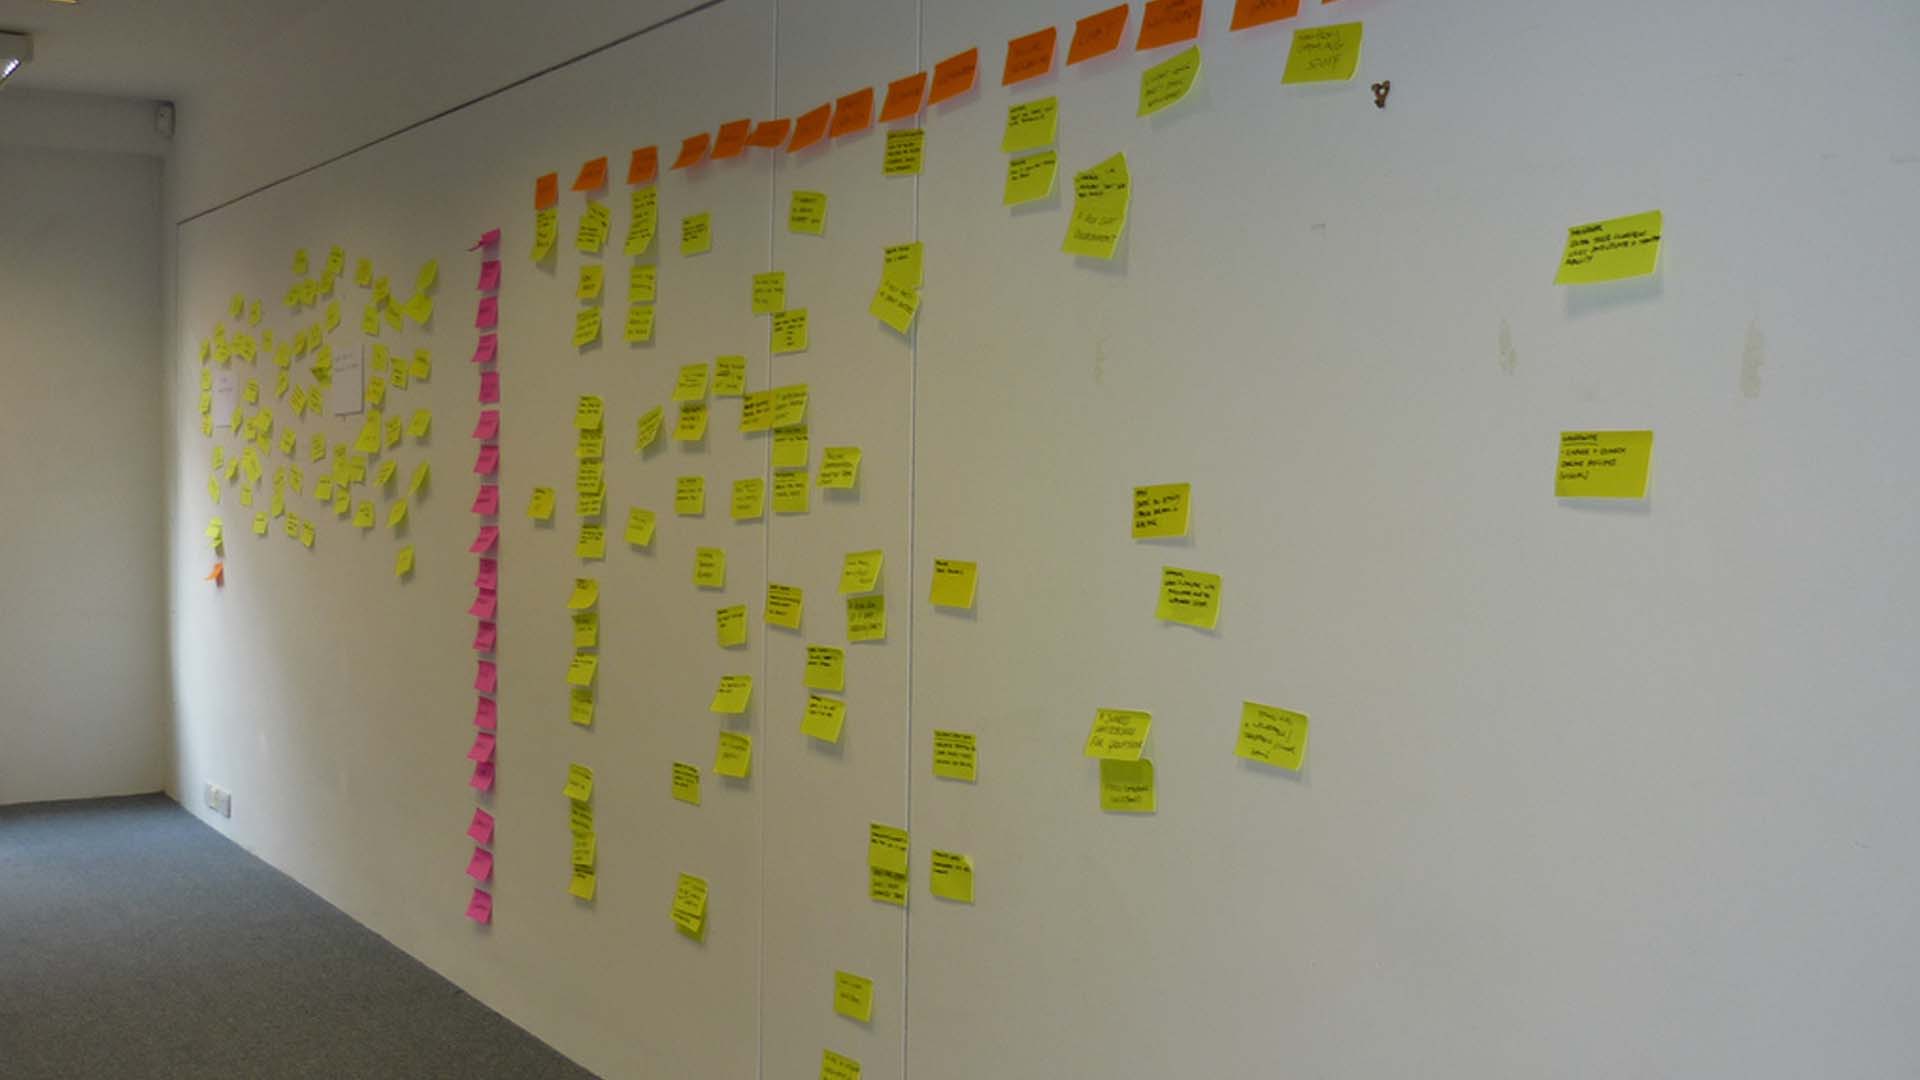 Ideaflip's beginnings - sticky notes on a wall